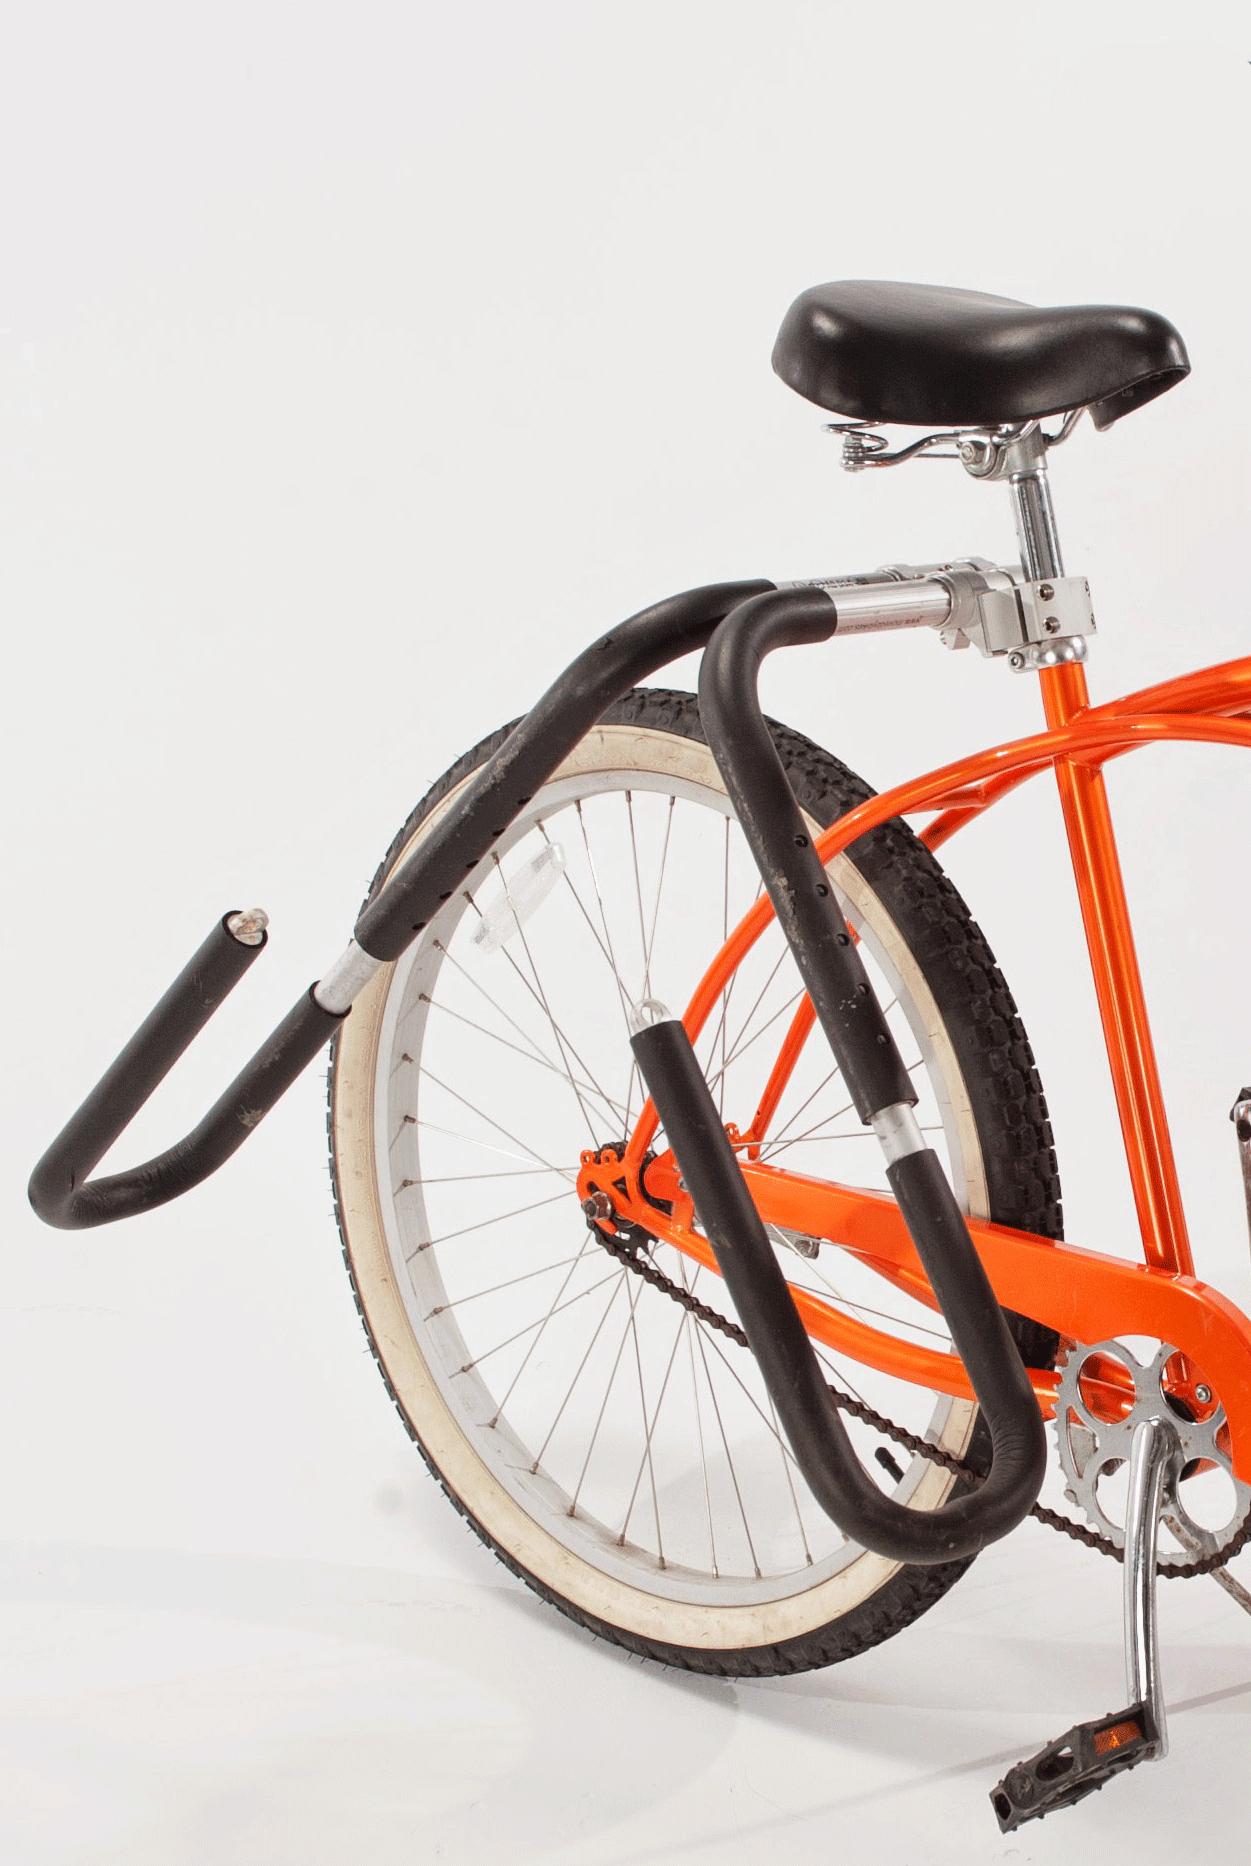 The backside of an orange bike with an MBB surfboard rack